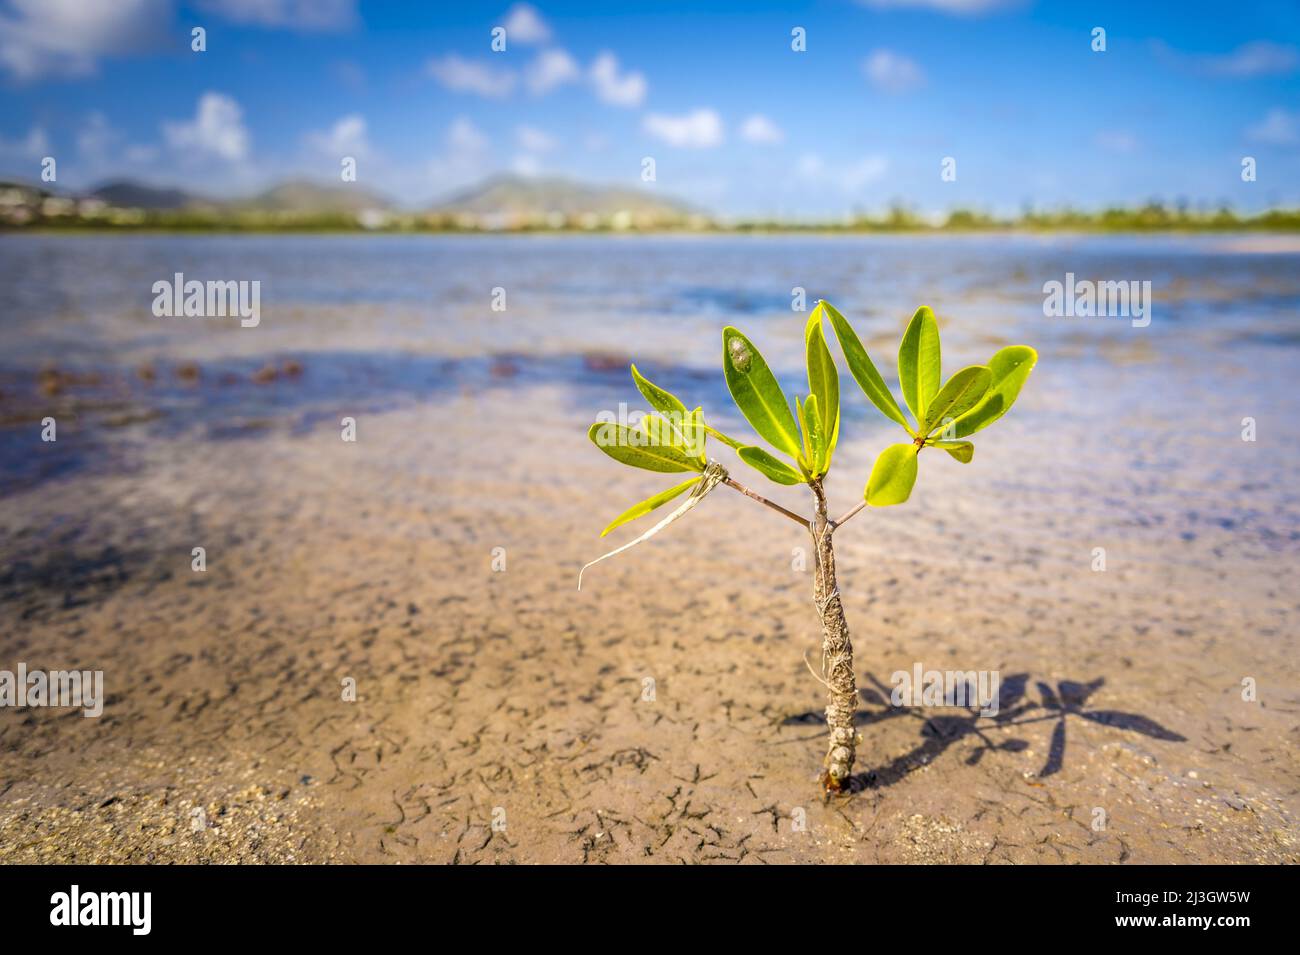 France, Lesser Antilles, French West Indies, Saint-Martin, Le Galion, National Nature Reserve, Salines d'Orient, Sole survivor of the 4,500 seedlings of red mangrove (Rhizophora mangle) planted on the banks of the Salines d'Orient by children of the school of Quartier d'Orléans Stock Photo